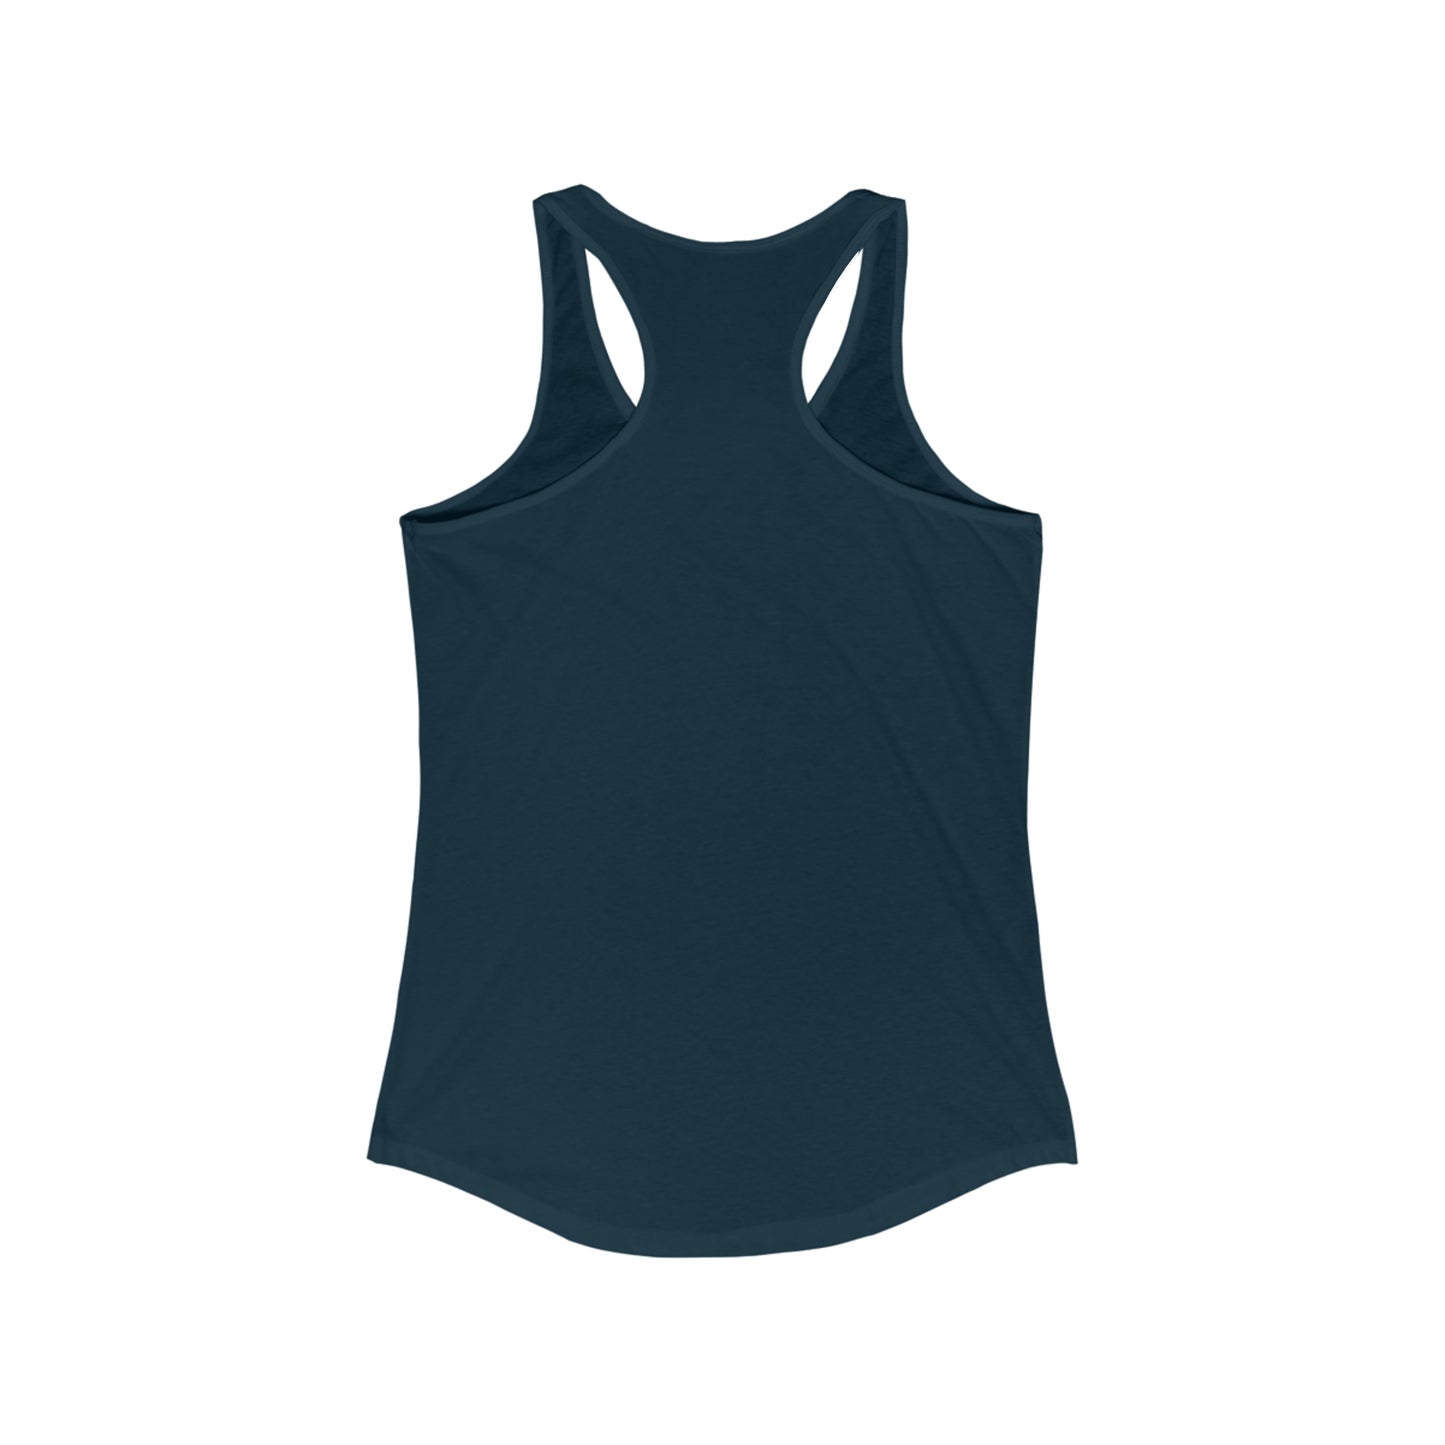 Dark teal Women's Logo Racerback Tank by Printify displayed against a plain white background. The top, inspired by Toronto's Cabbagetown style, features a scoop neck and a slightly curved hem.